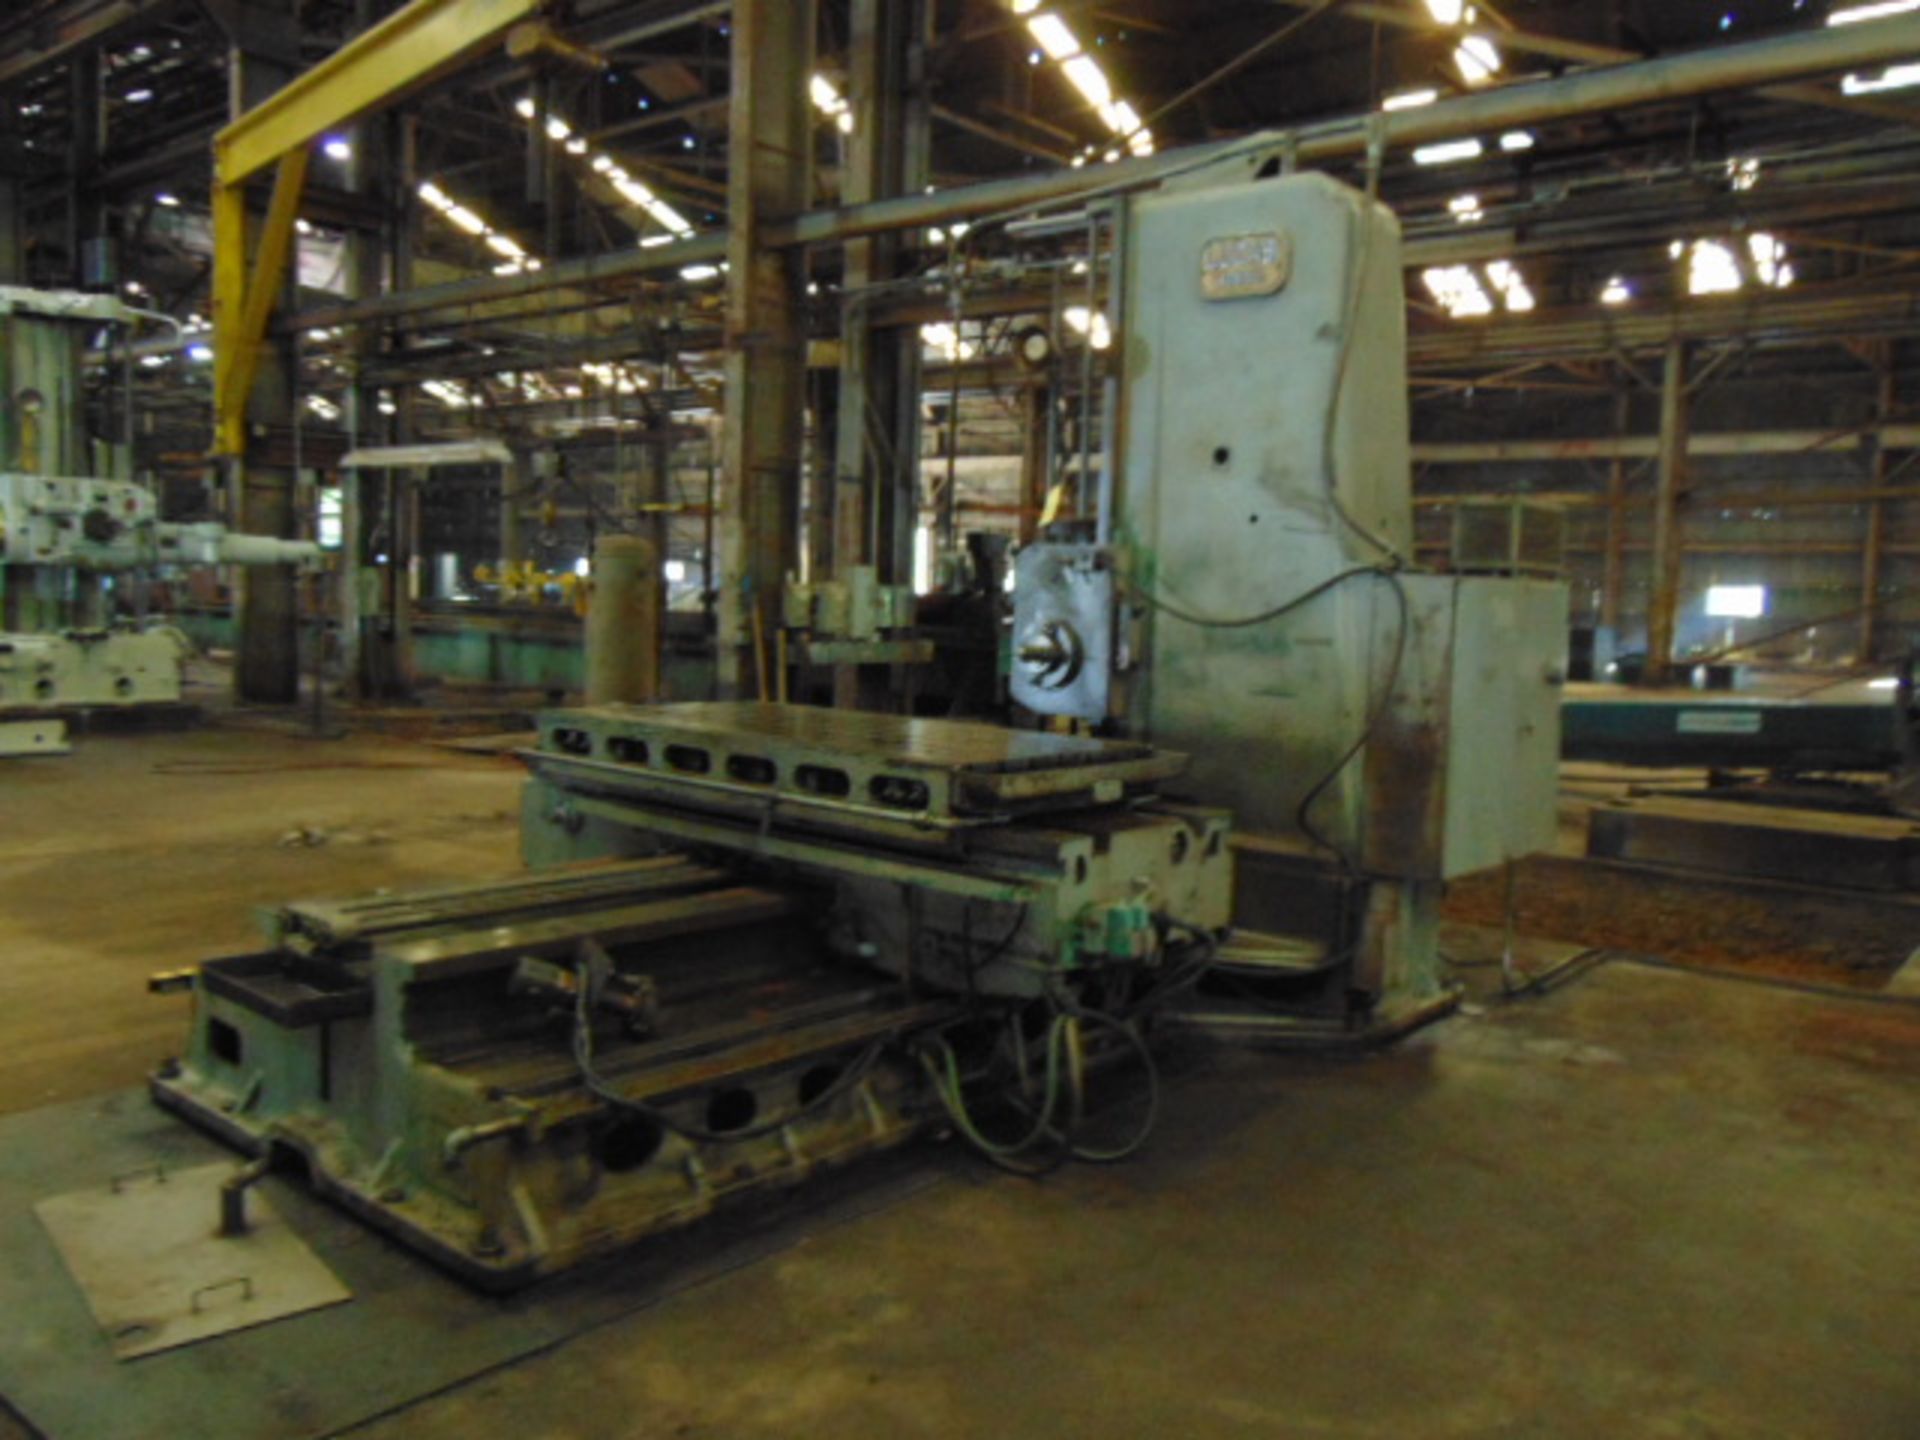 TABLE TYPE HORIZONTAL BORING MILL, LUCAS MDL. 428-60, 40" x 74" tbl., 60" cross travel, approx. - Image 2 of 16